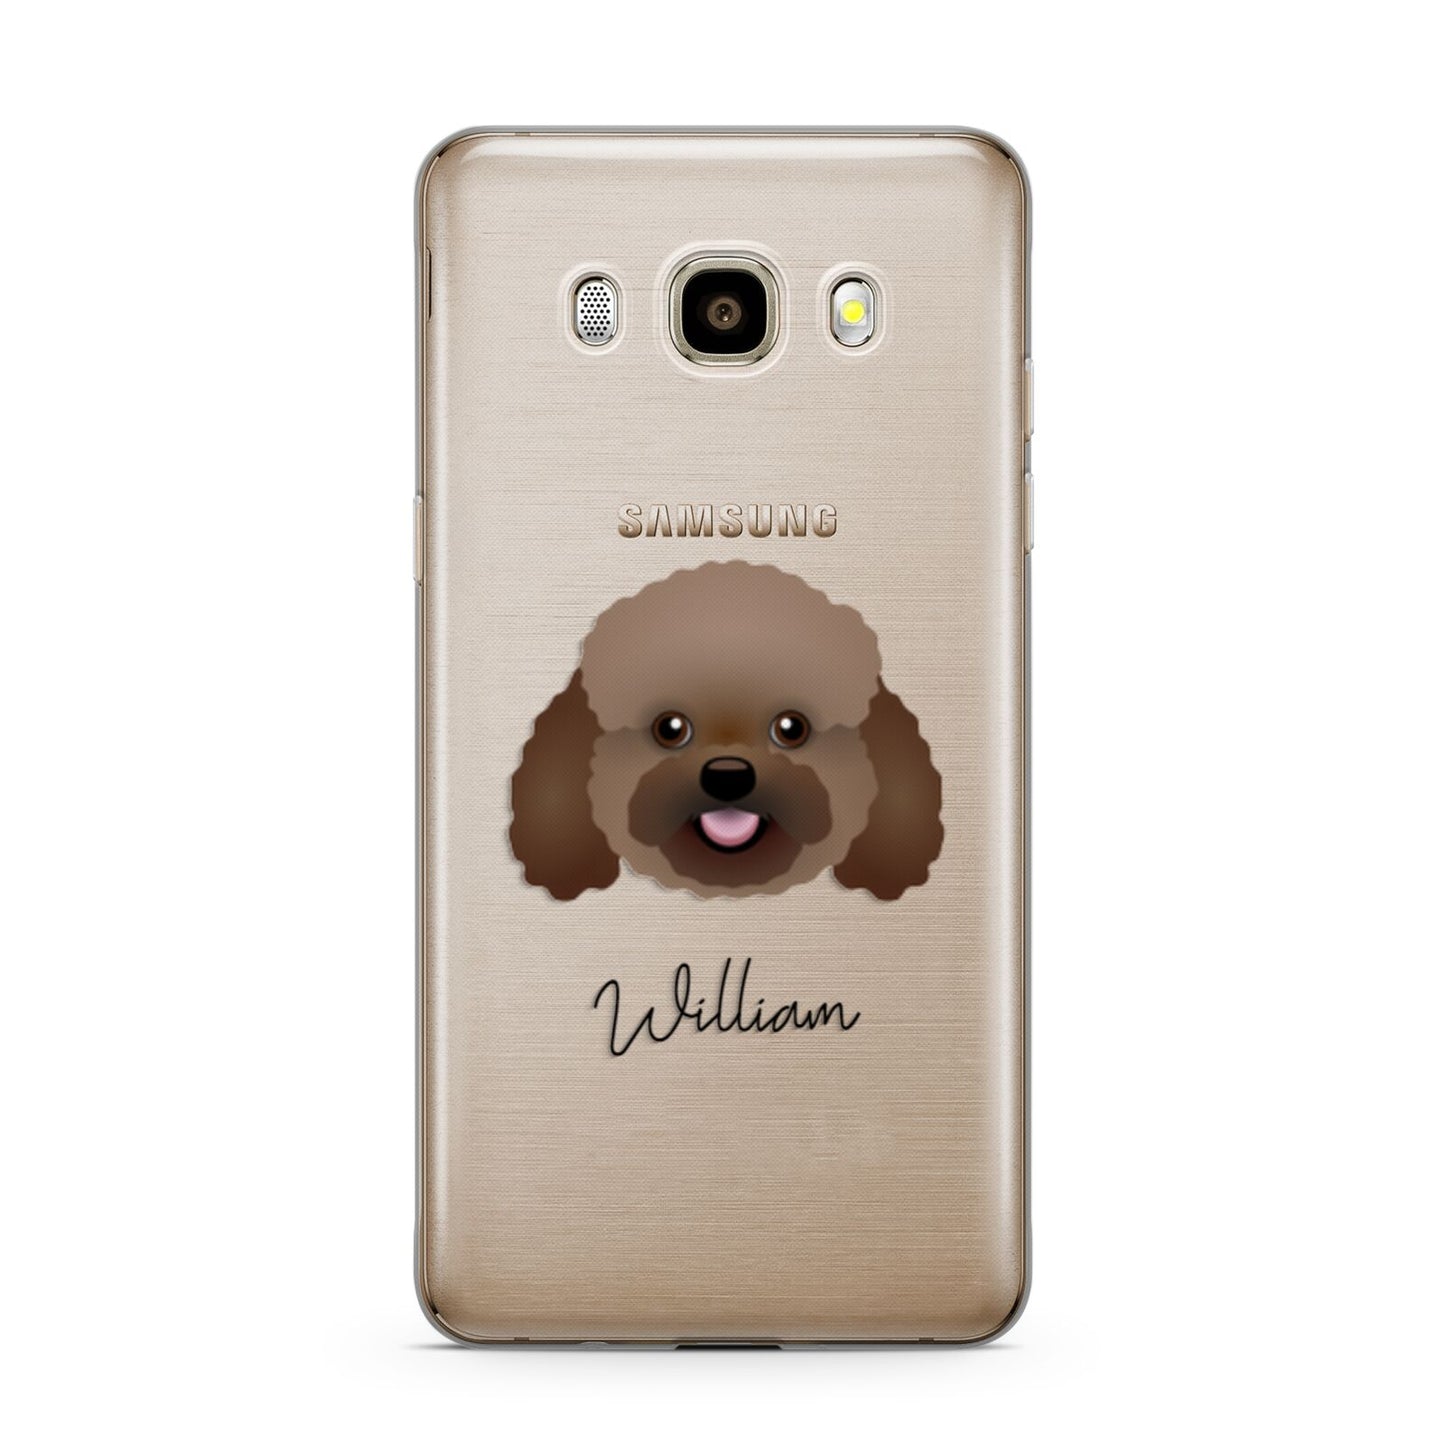 Bich poo Personalised Samsung Galaxy J7 2016 Case on gold phone